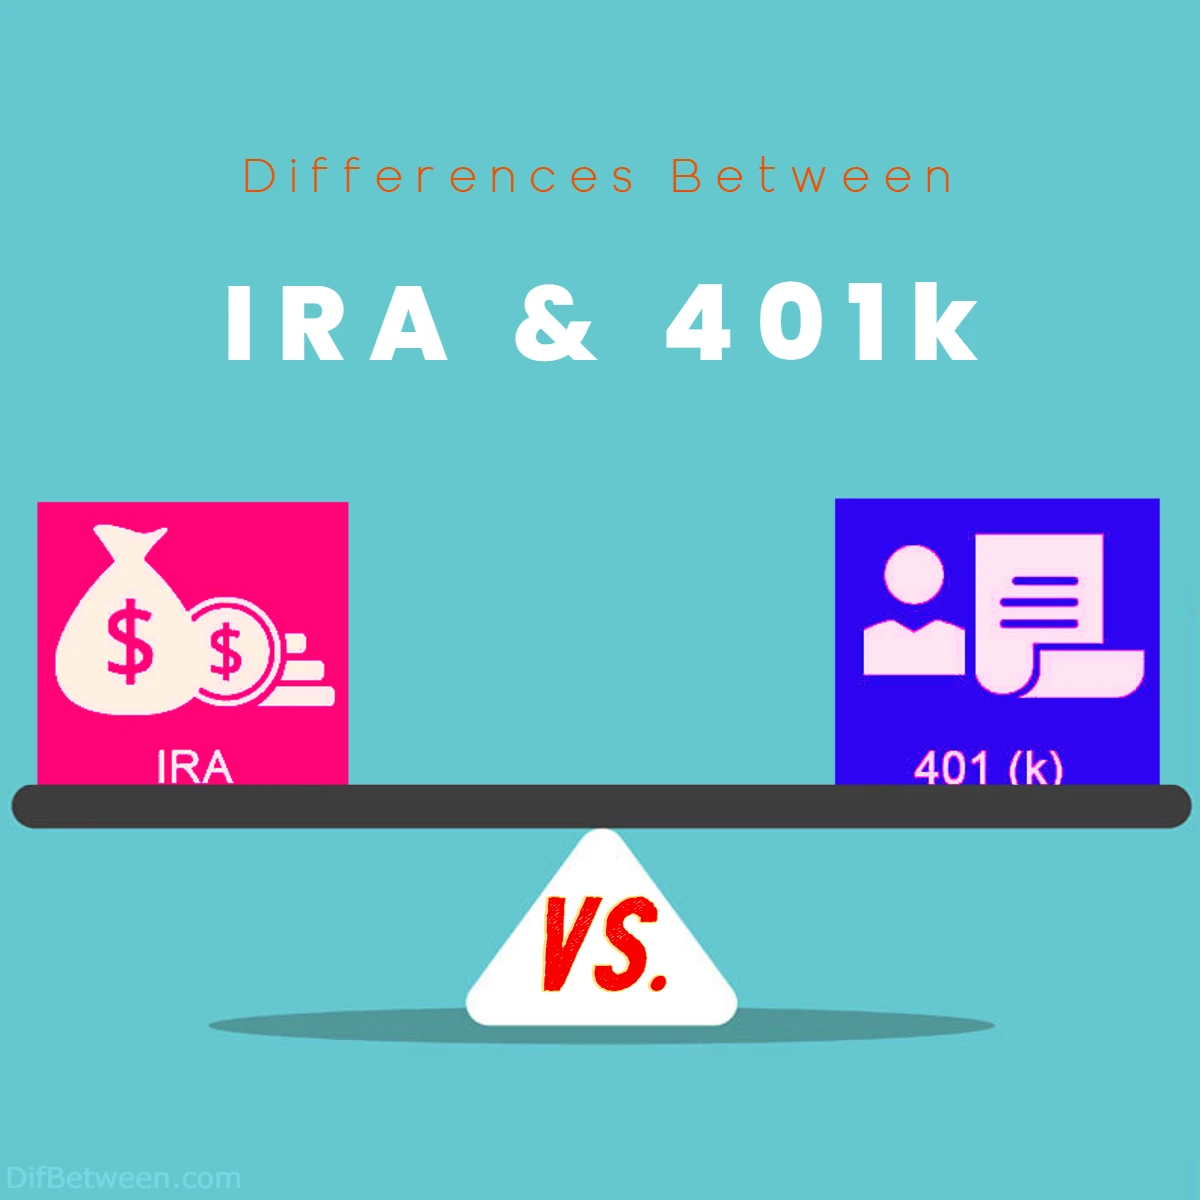 Differences Between401k and IRA